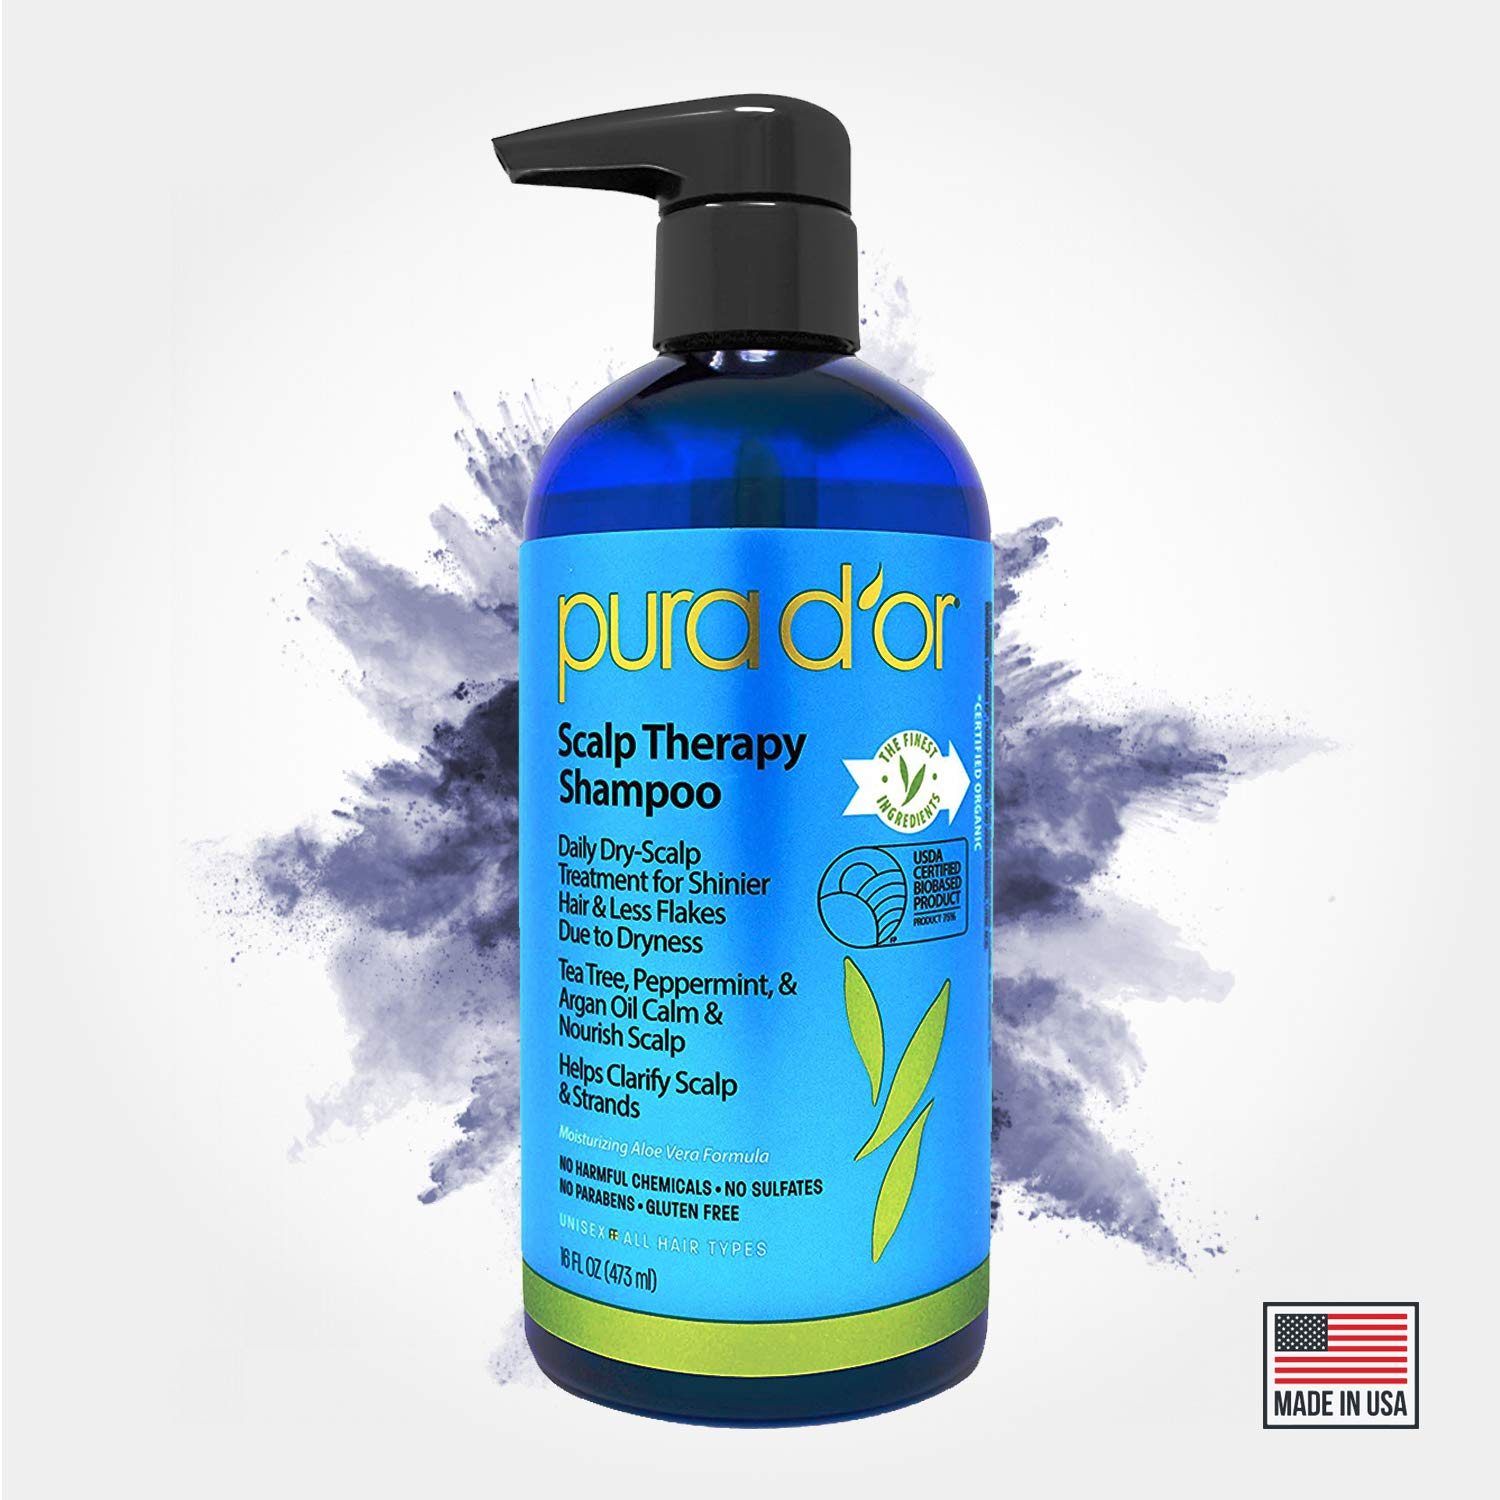 PURA D'OR Scalp Therapy Shampoo (16oz) Hydrates & Nourishes Scalp - Scalp Care Shampoo For Itchy Flaky Scalp w/ Tea Tree, Peppermint, Patchouli, Cedarwood, Clary Sage, Argan Oil (Packaging may vary)